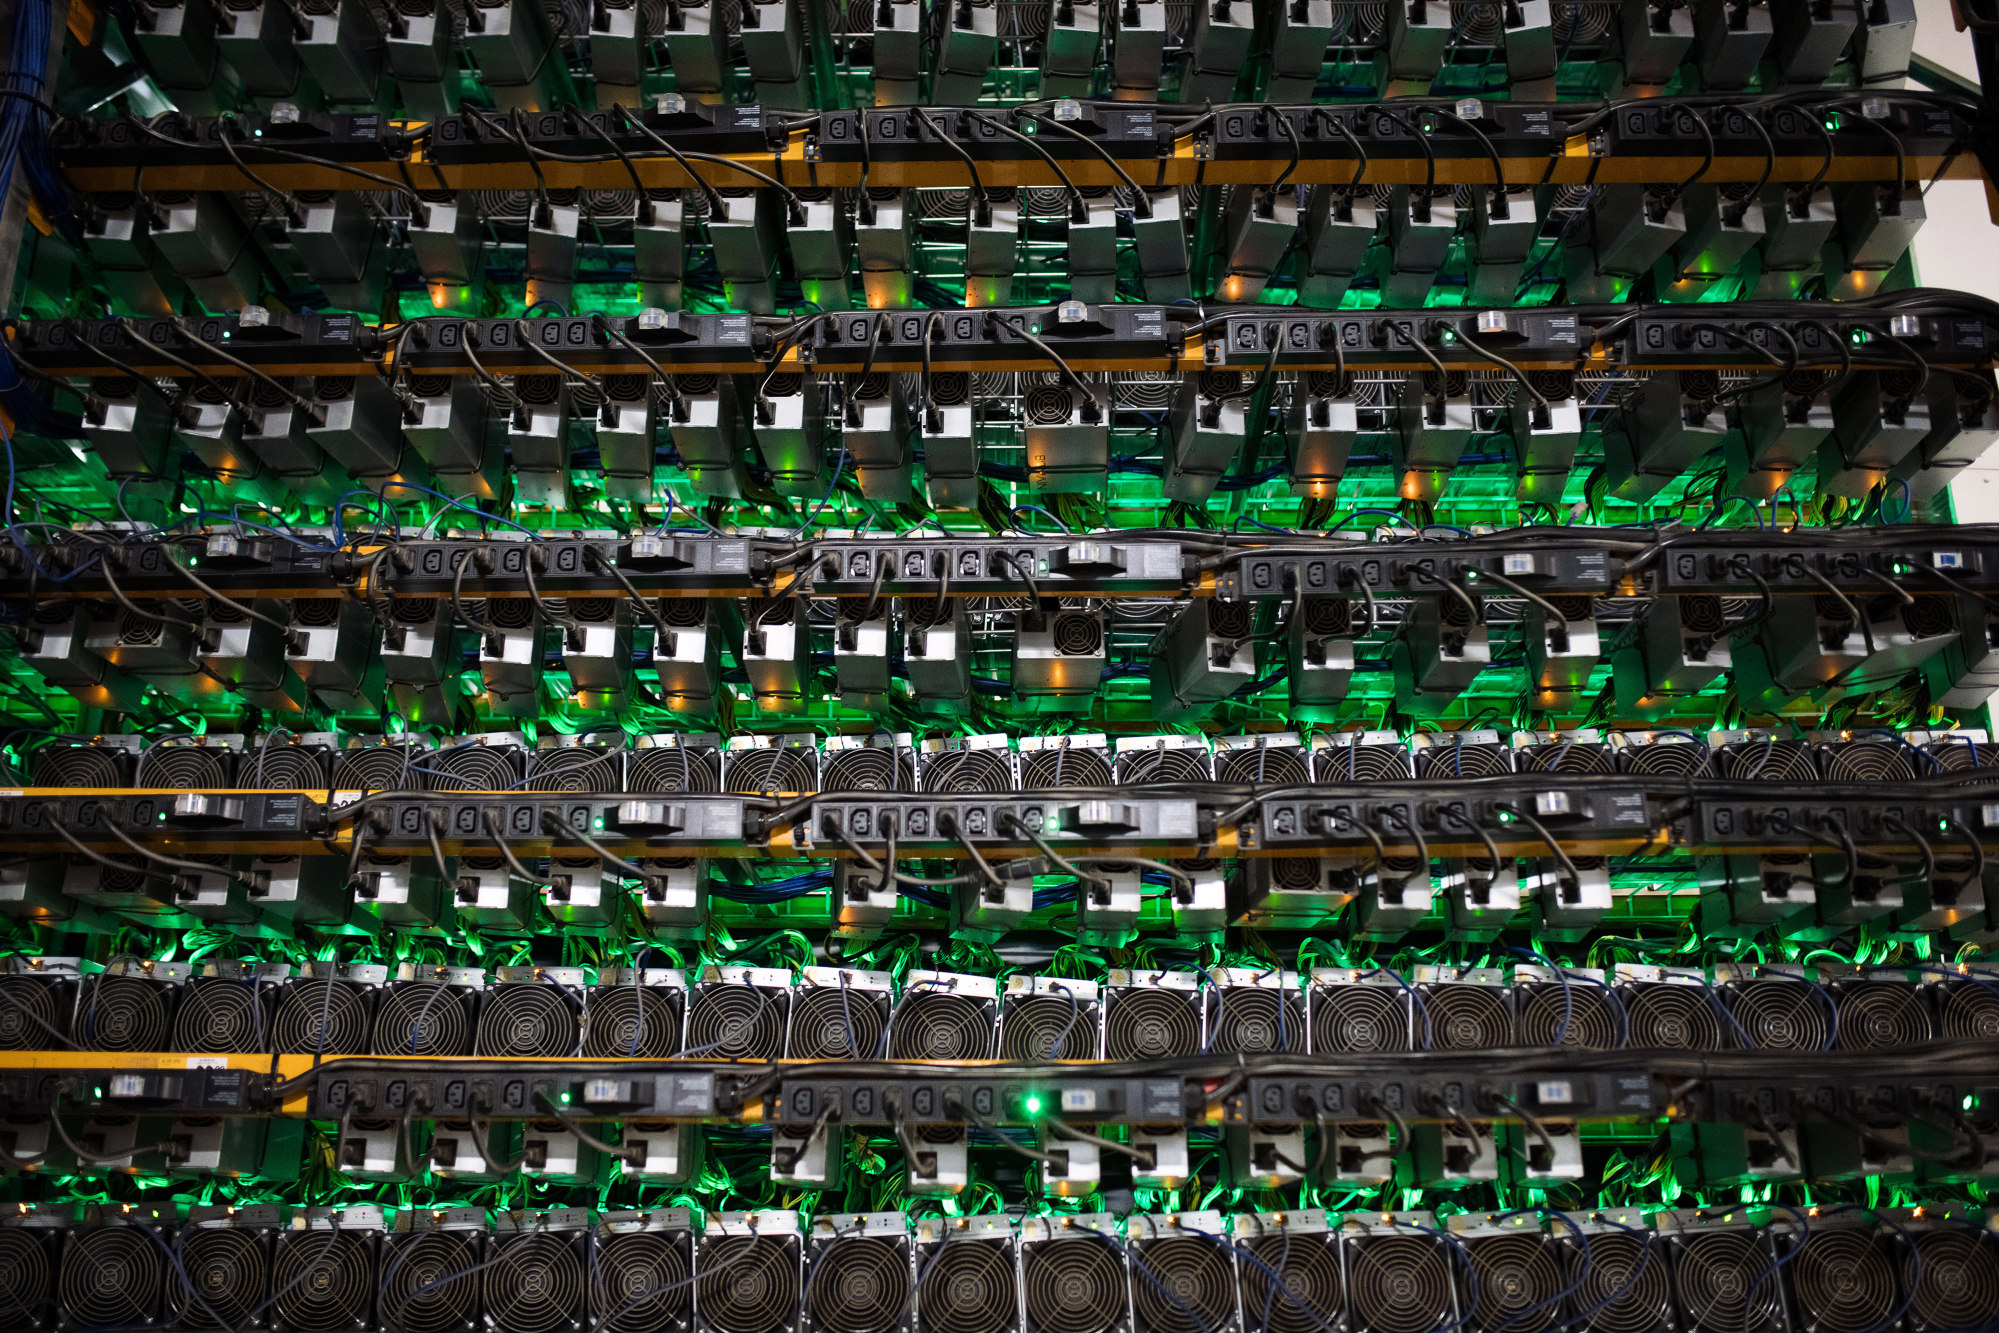 Cryptocurrency mining rigs sit on racks at a Bitfarms facility in Saint-Hyacinthe, Quebec, Canada, on Thursday, July 26, 2018. Bitcoin has rallied more than 30 percent in July, shrugging off security and regulatory concerns that have plagued the virtual currency for much of this year.